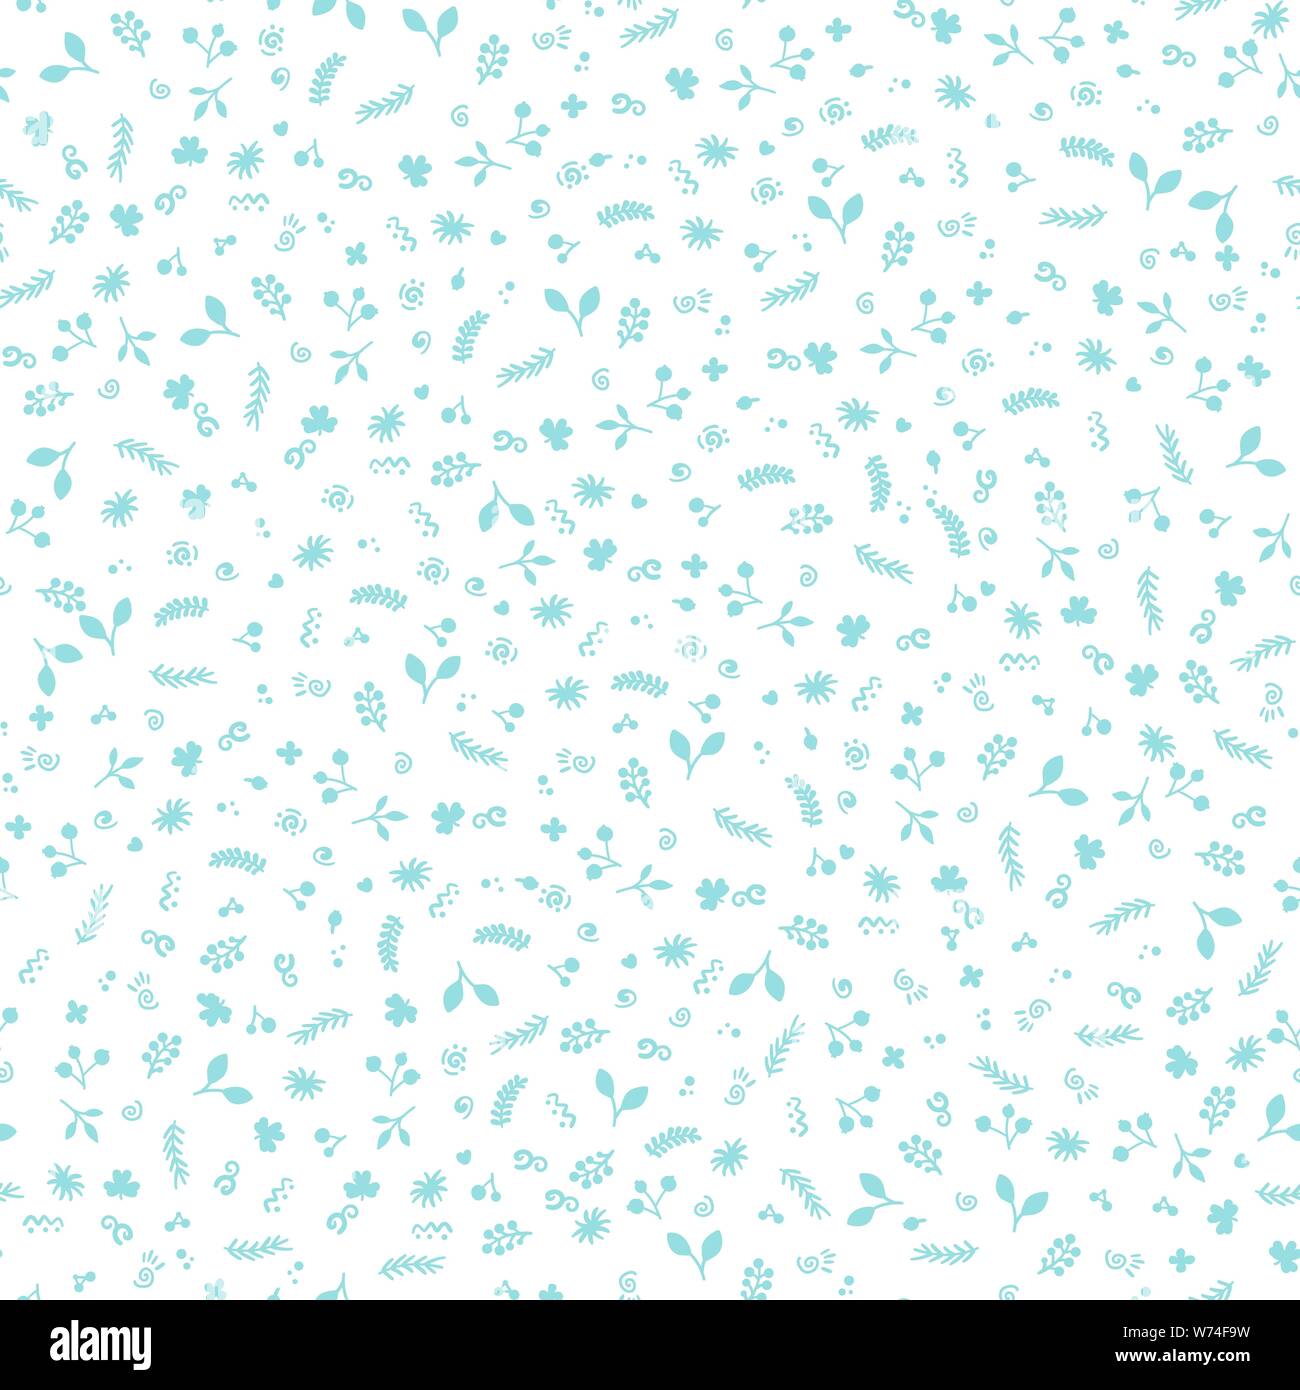 Cute Seamless Floral Pattern Simple Flowers Background For Fabric